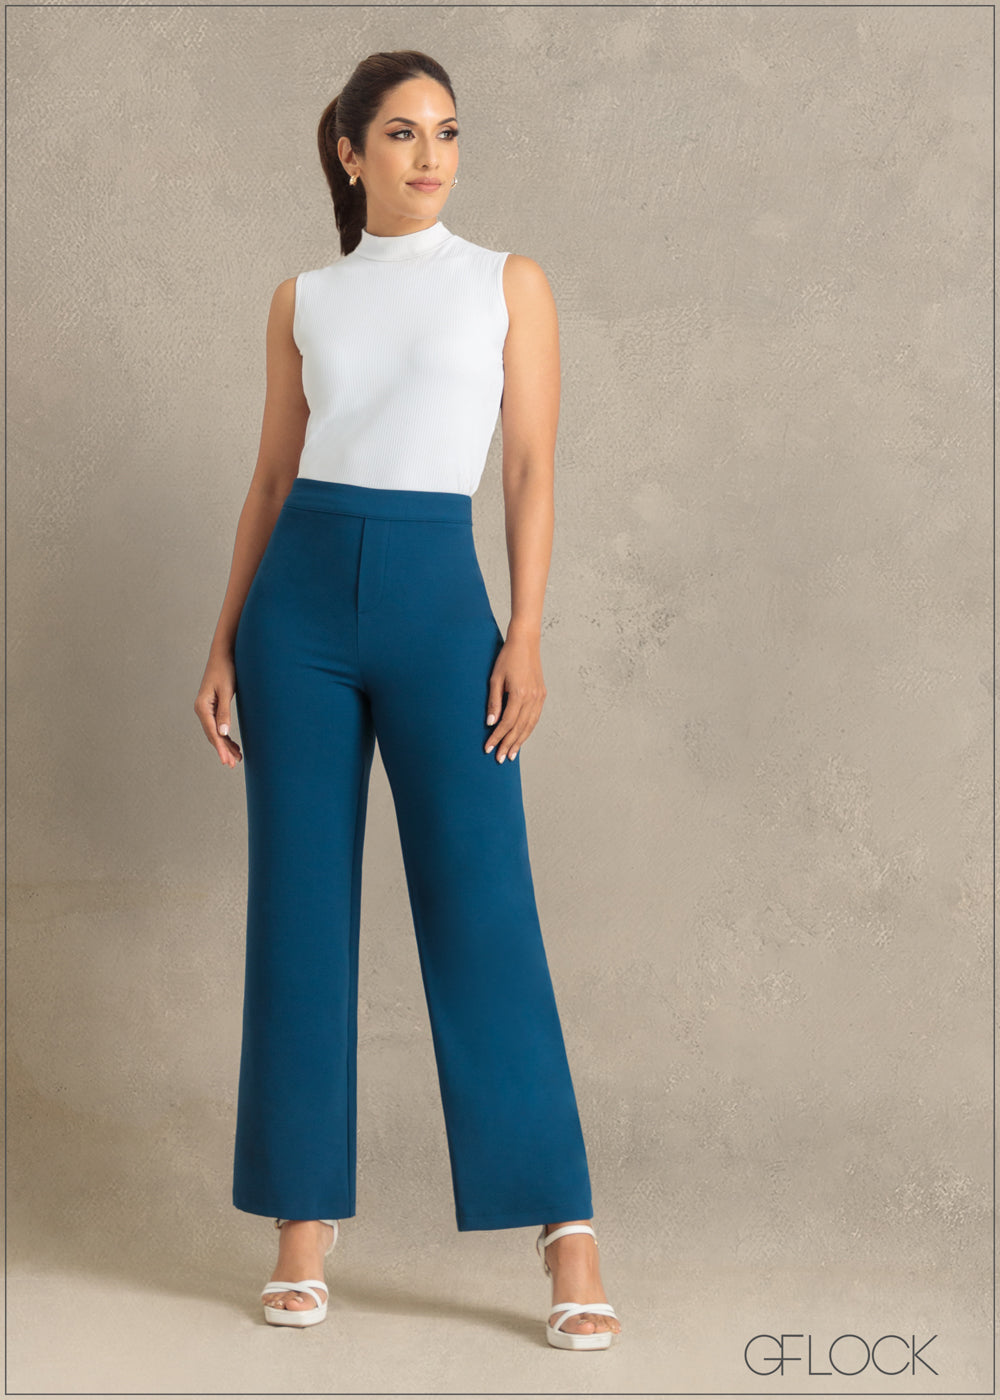 Tapered Pant With Waist Band Detail - 241123